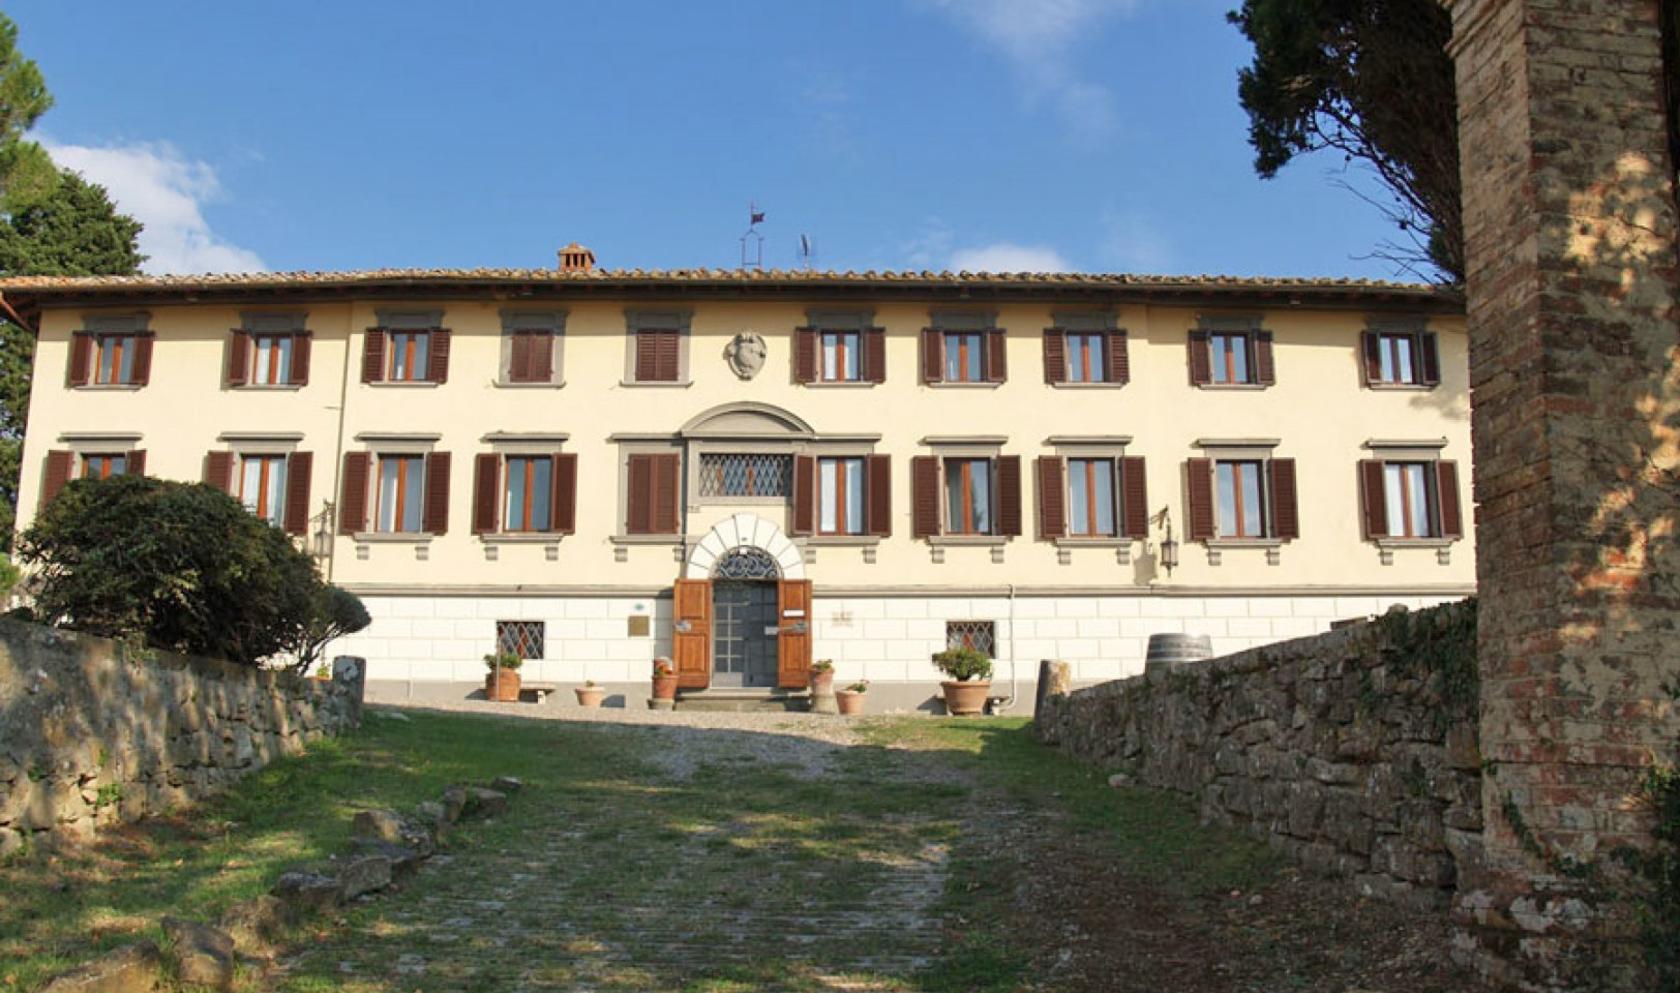 Toscana Immobiliare - Property of 180 hectares in the Chianti area with hotel, restaurant, vineyards and winery.